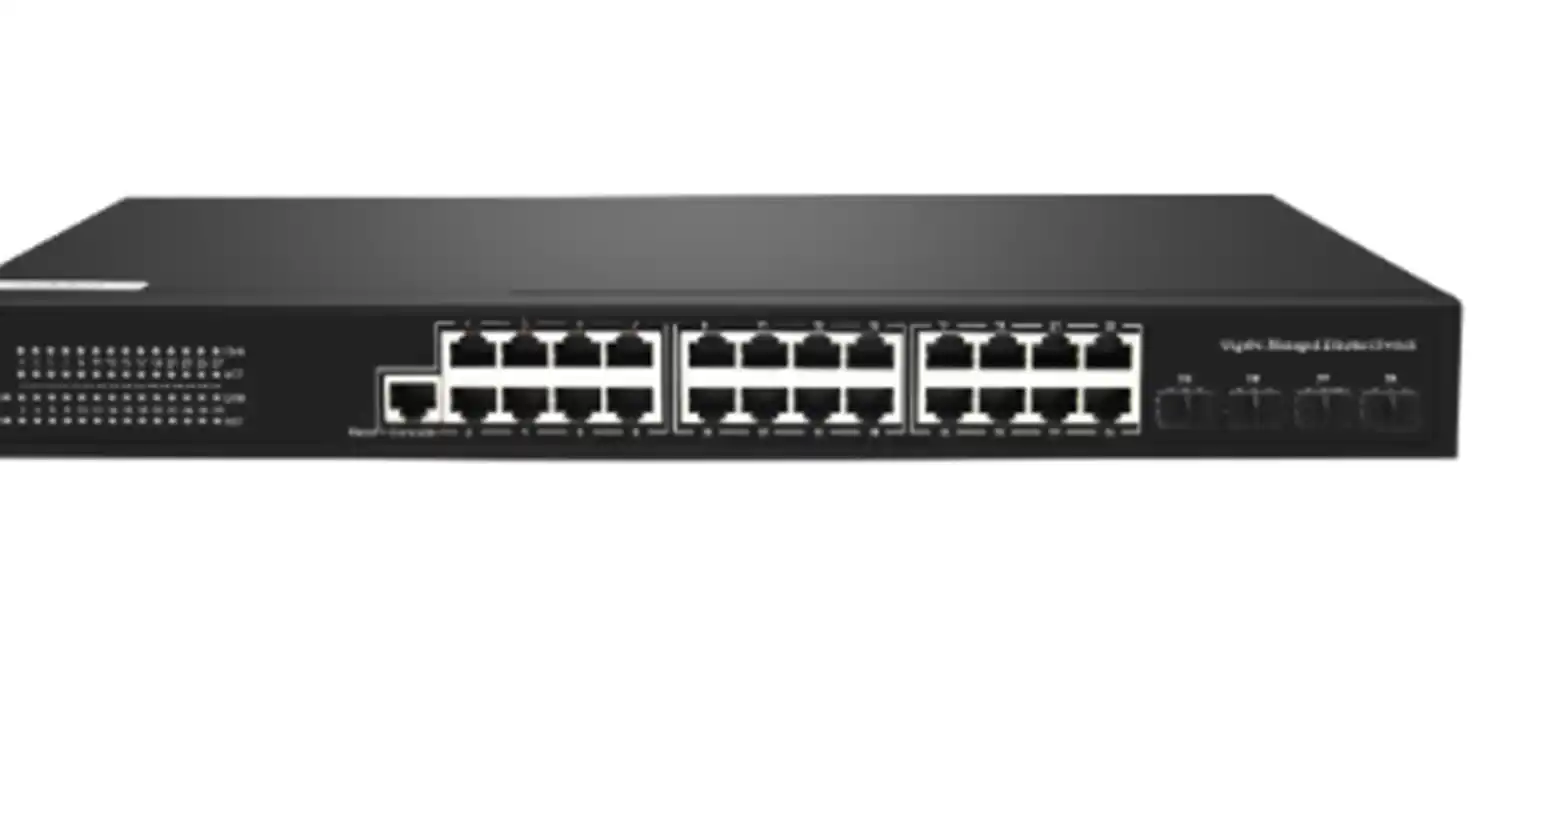 ODS-24MP4S1C-400 Layer 2 Managed 32 Ports 10/100/1000M  PoE Switches ,1-24 Port support POE ,with 4 Uplink Gigabit SFP port